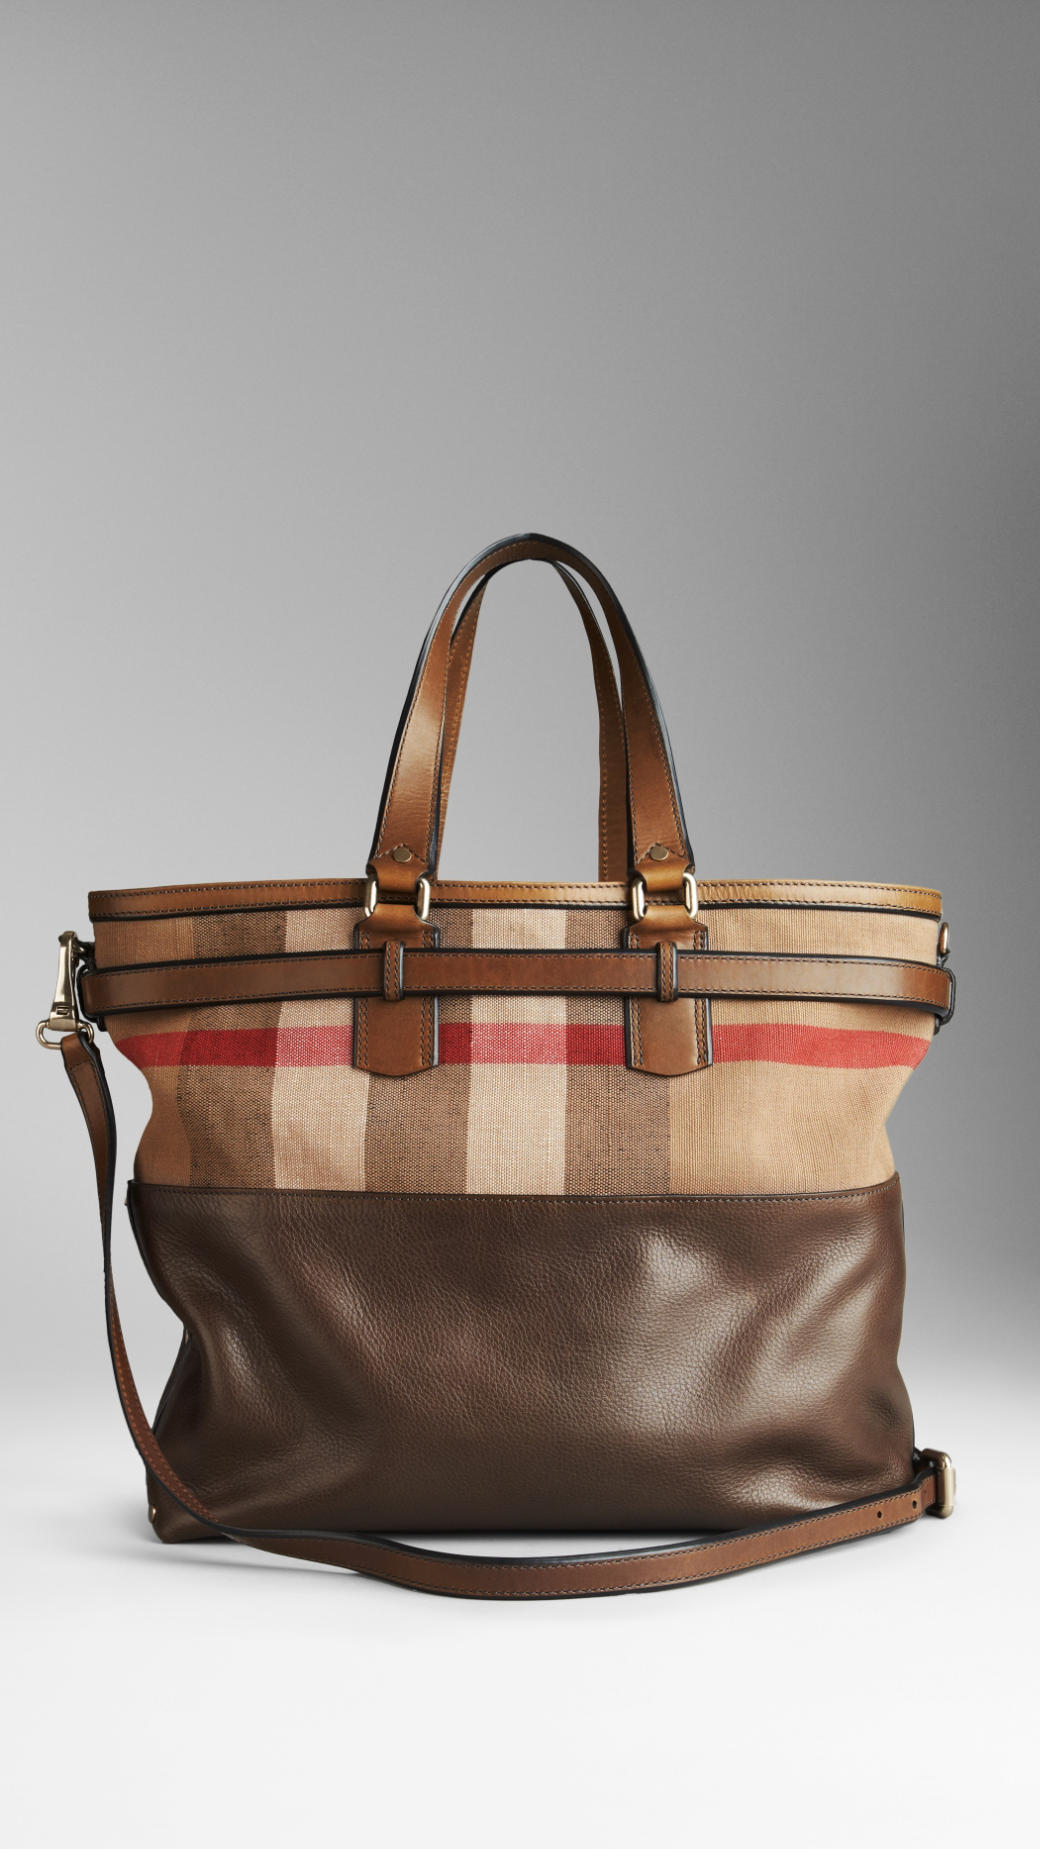 Burberry Large Check Canvas Tote Bag in Brown - Lyst